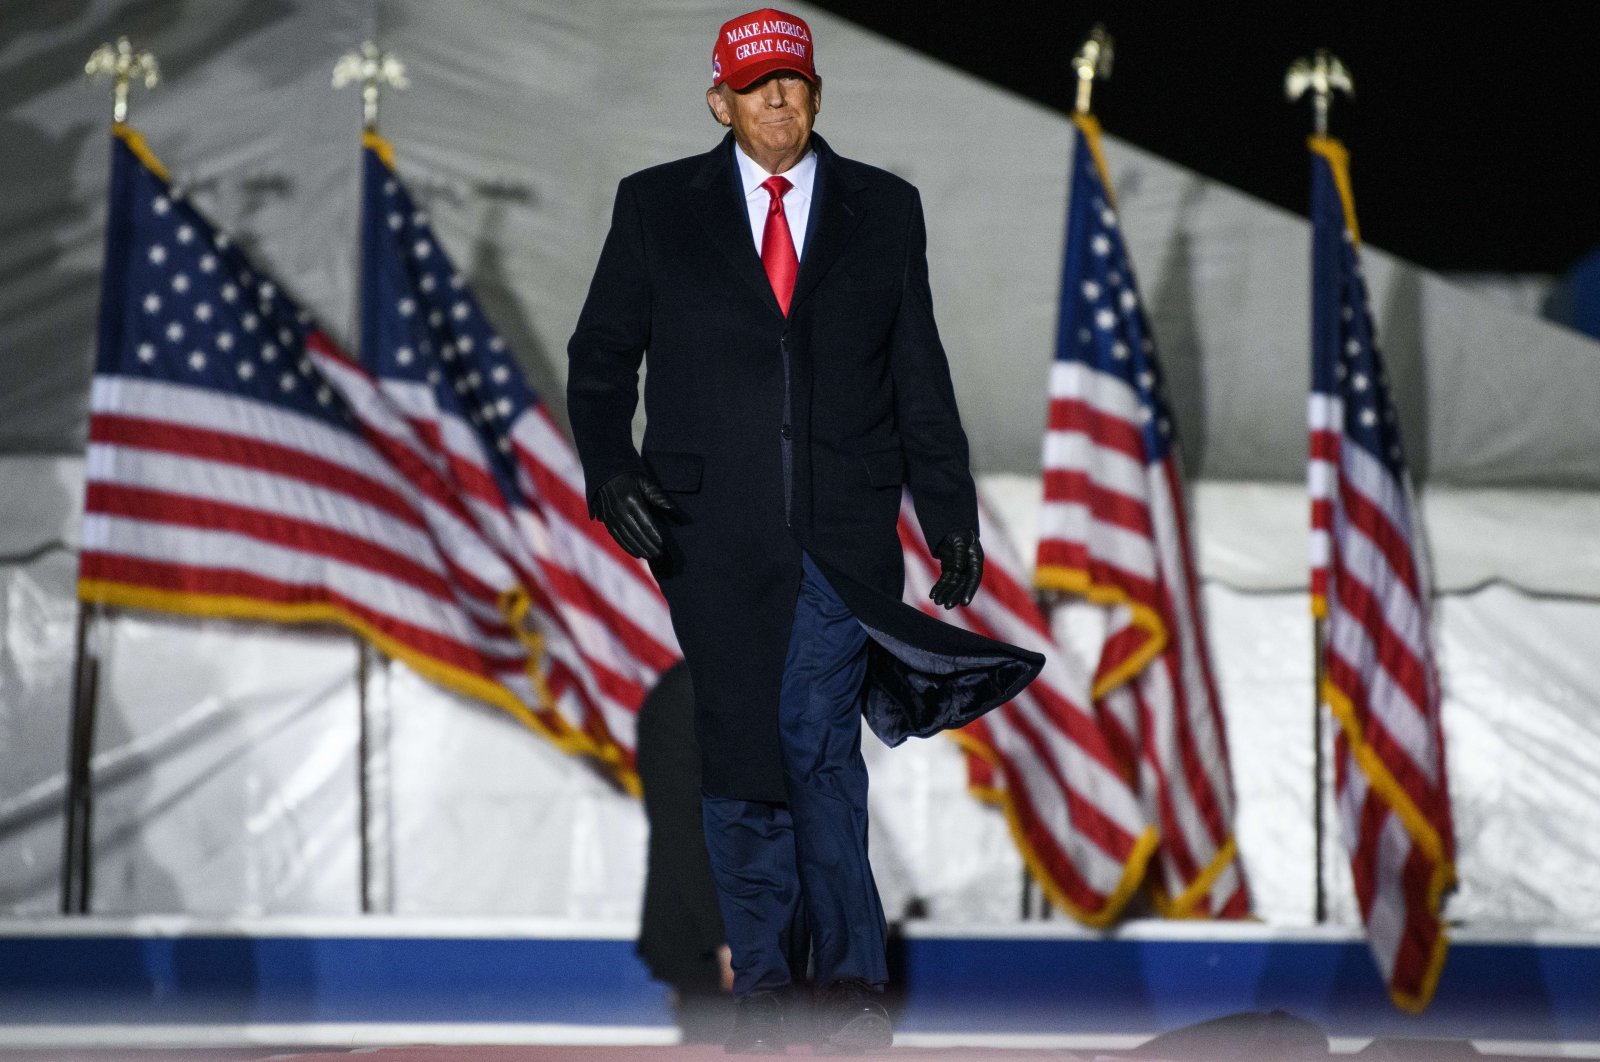 Former U.S. President Donald Trump arrives during a campaign event in Sioux City, Iowa, U.S., Nov. 3, 2022. (AFP Photo)